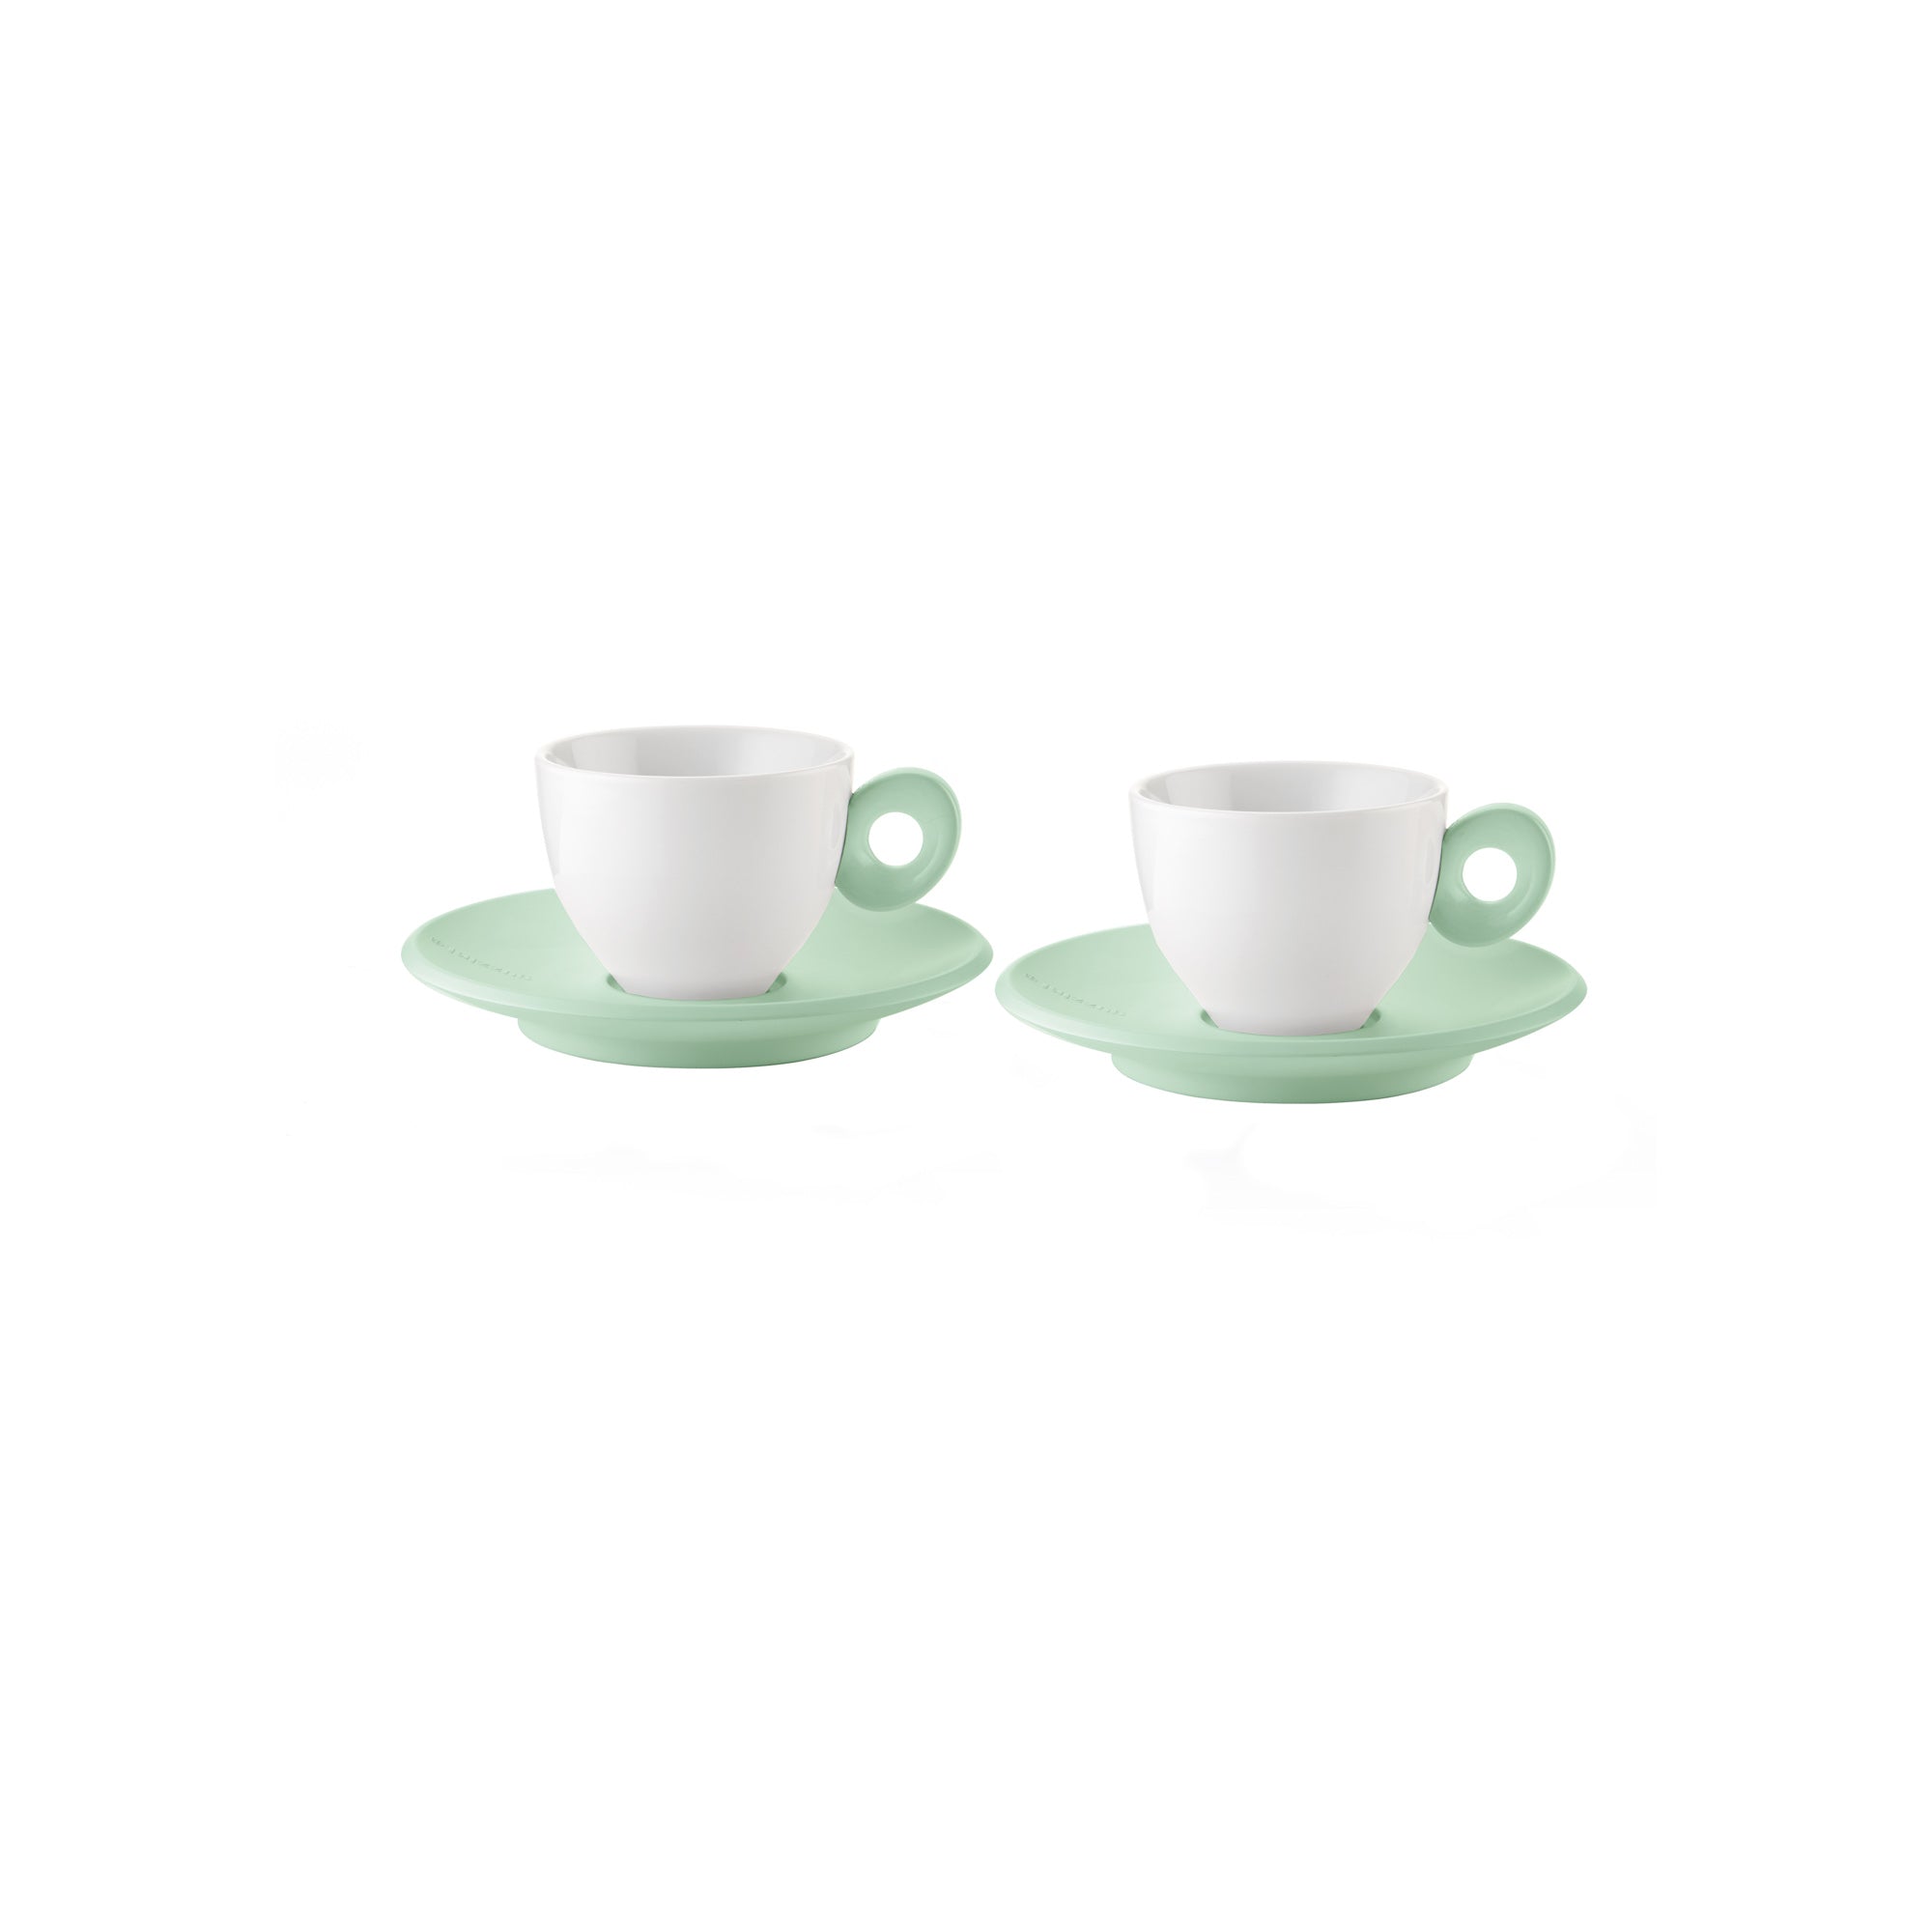 SET OF 2 ESPRESSO CUPS WITH SAUCERS "EVERYDAY"